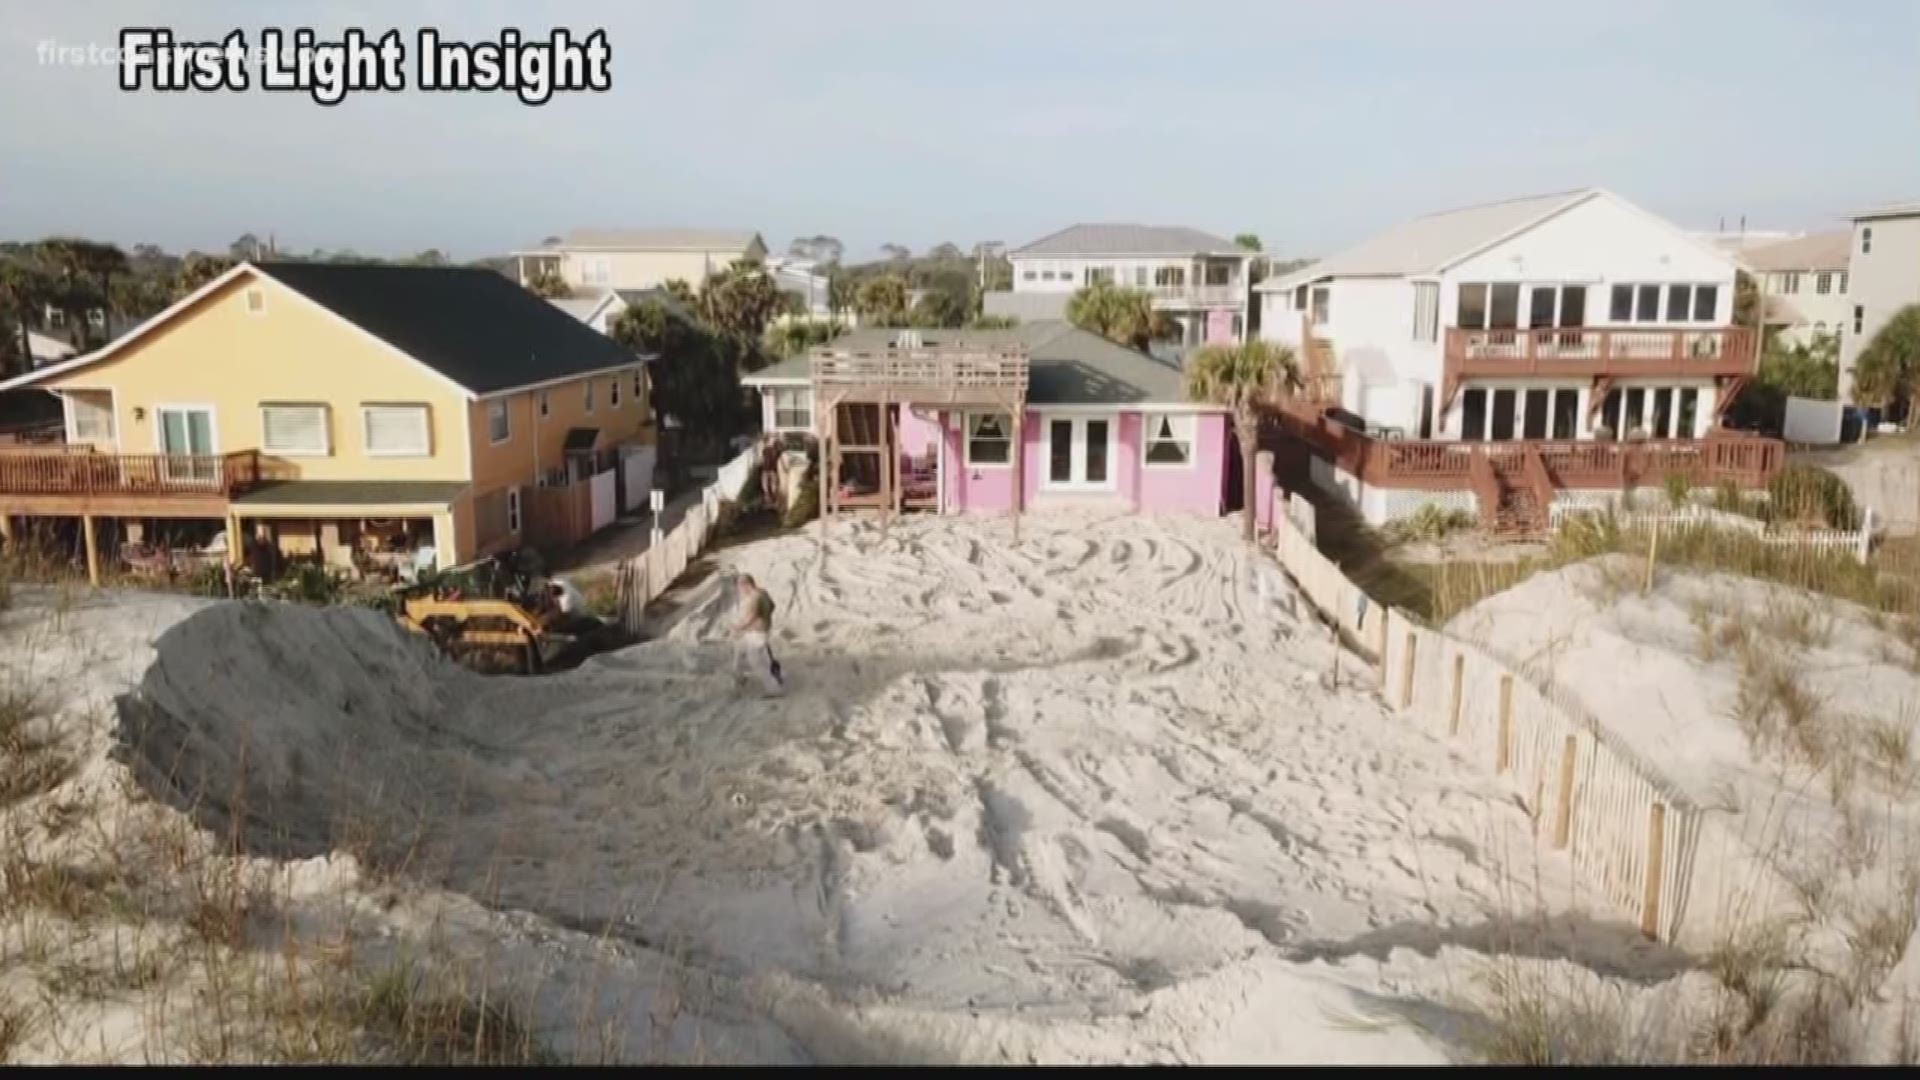 This is not the first time the homeowners bulldozed part of the dune, but it is the first time they have permission from the Department of Environmental Protection.